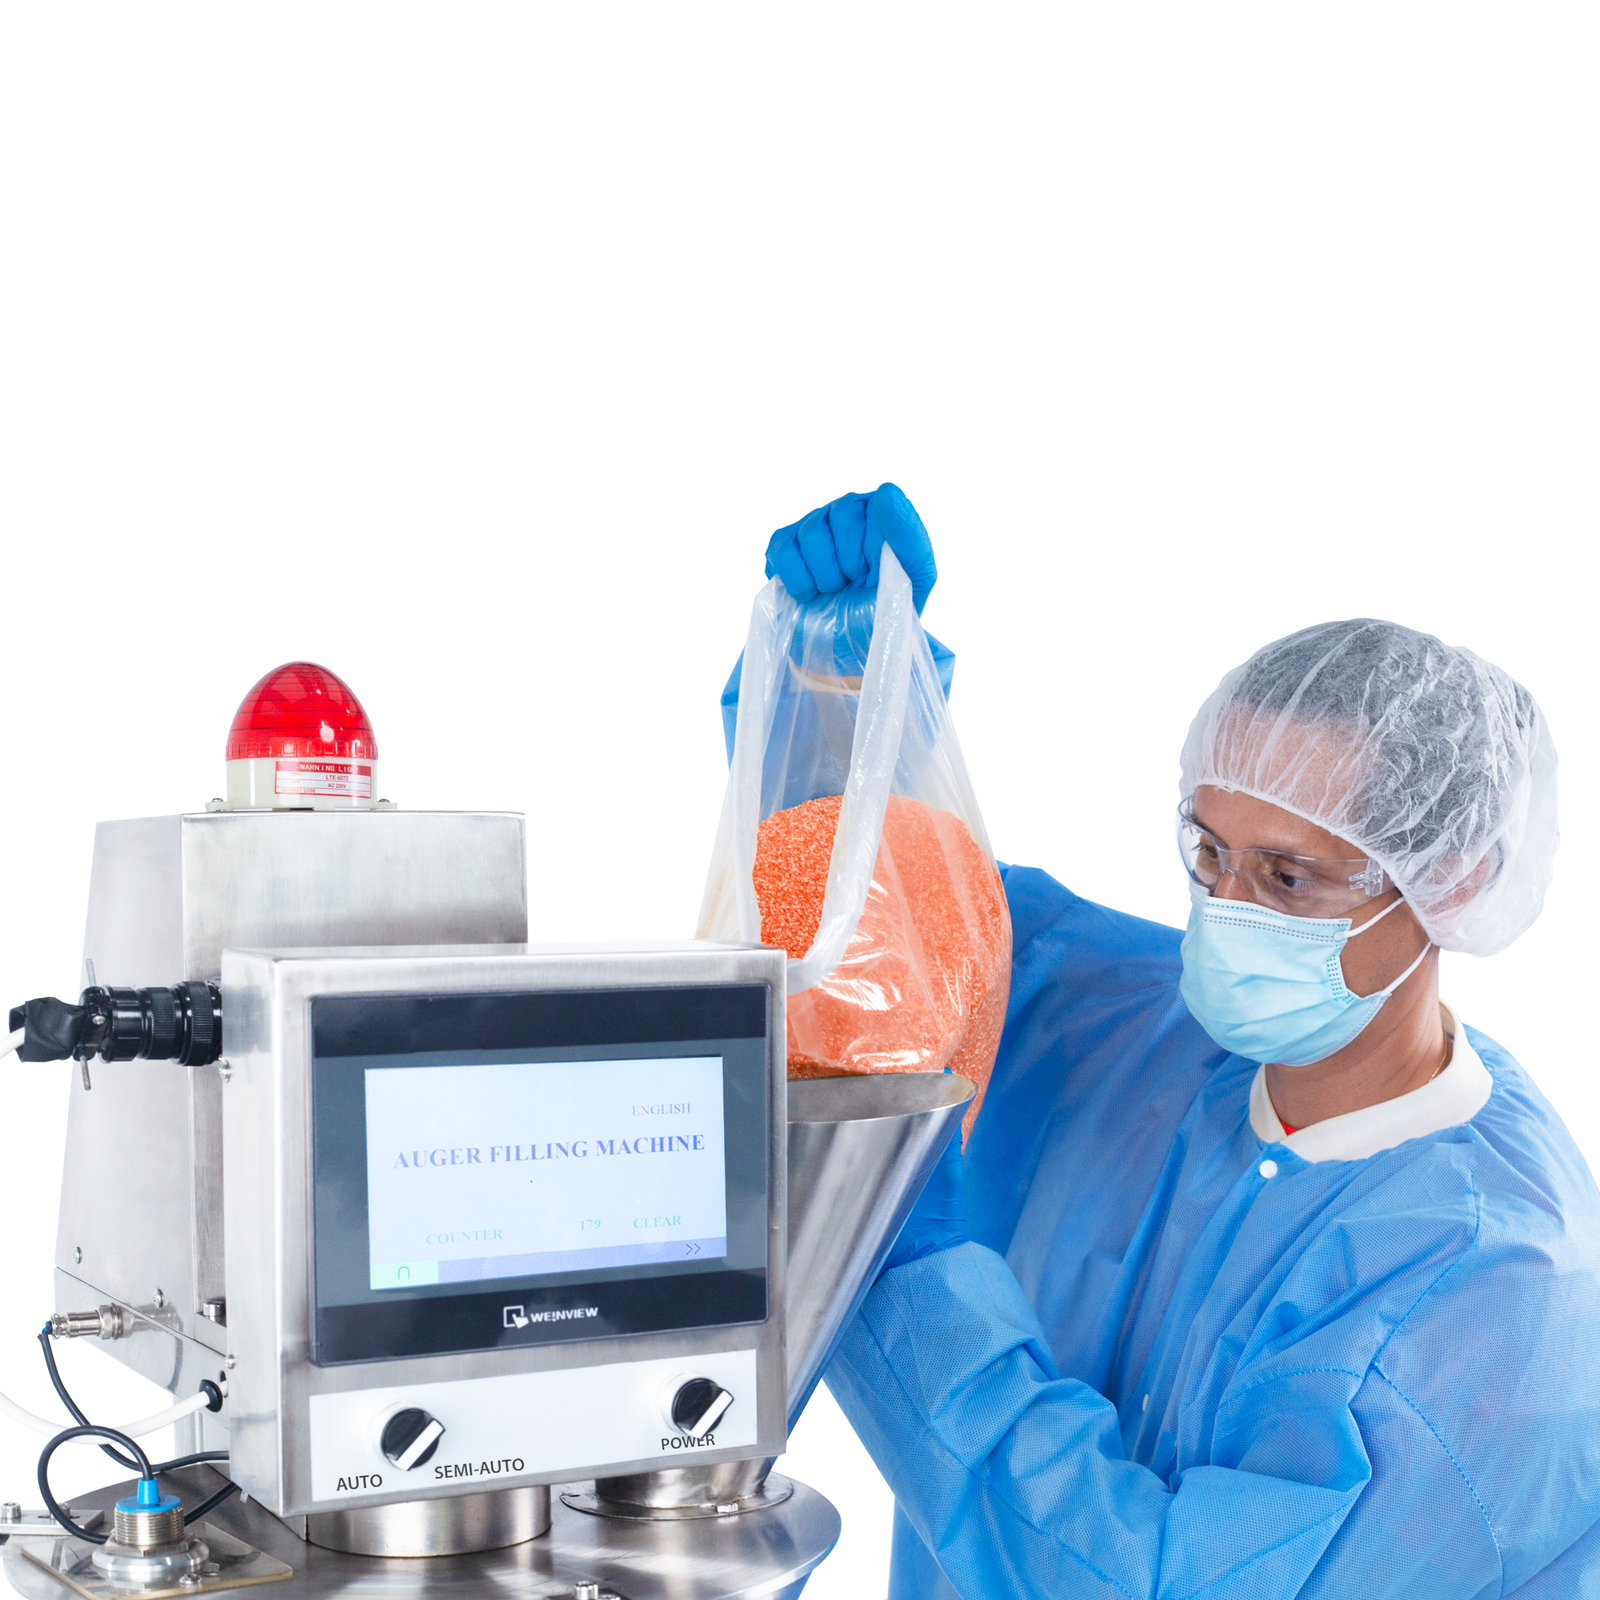 Close-up of a person with blue latex gloves and dressed in PPE holding a clear bag filled with a red seasoning powder. The bag is held over the feeding cone of the JORES TECHNOLOGIES® auger powder filler, which will be used to dispense seasoning powder into containers.